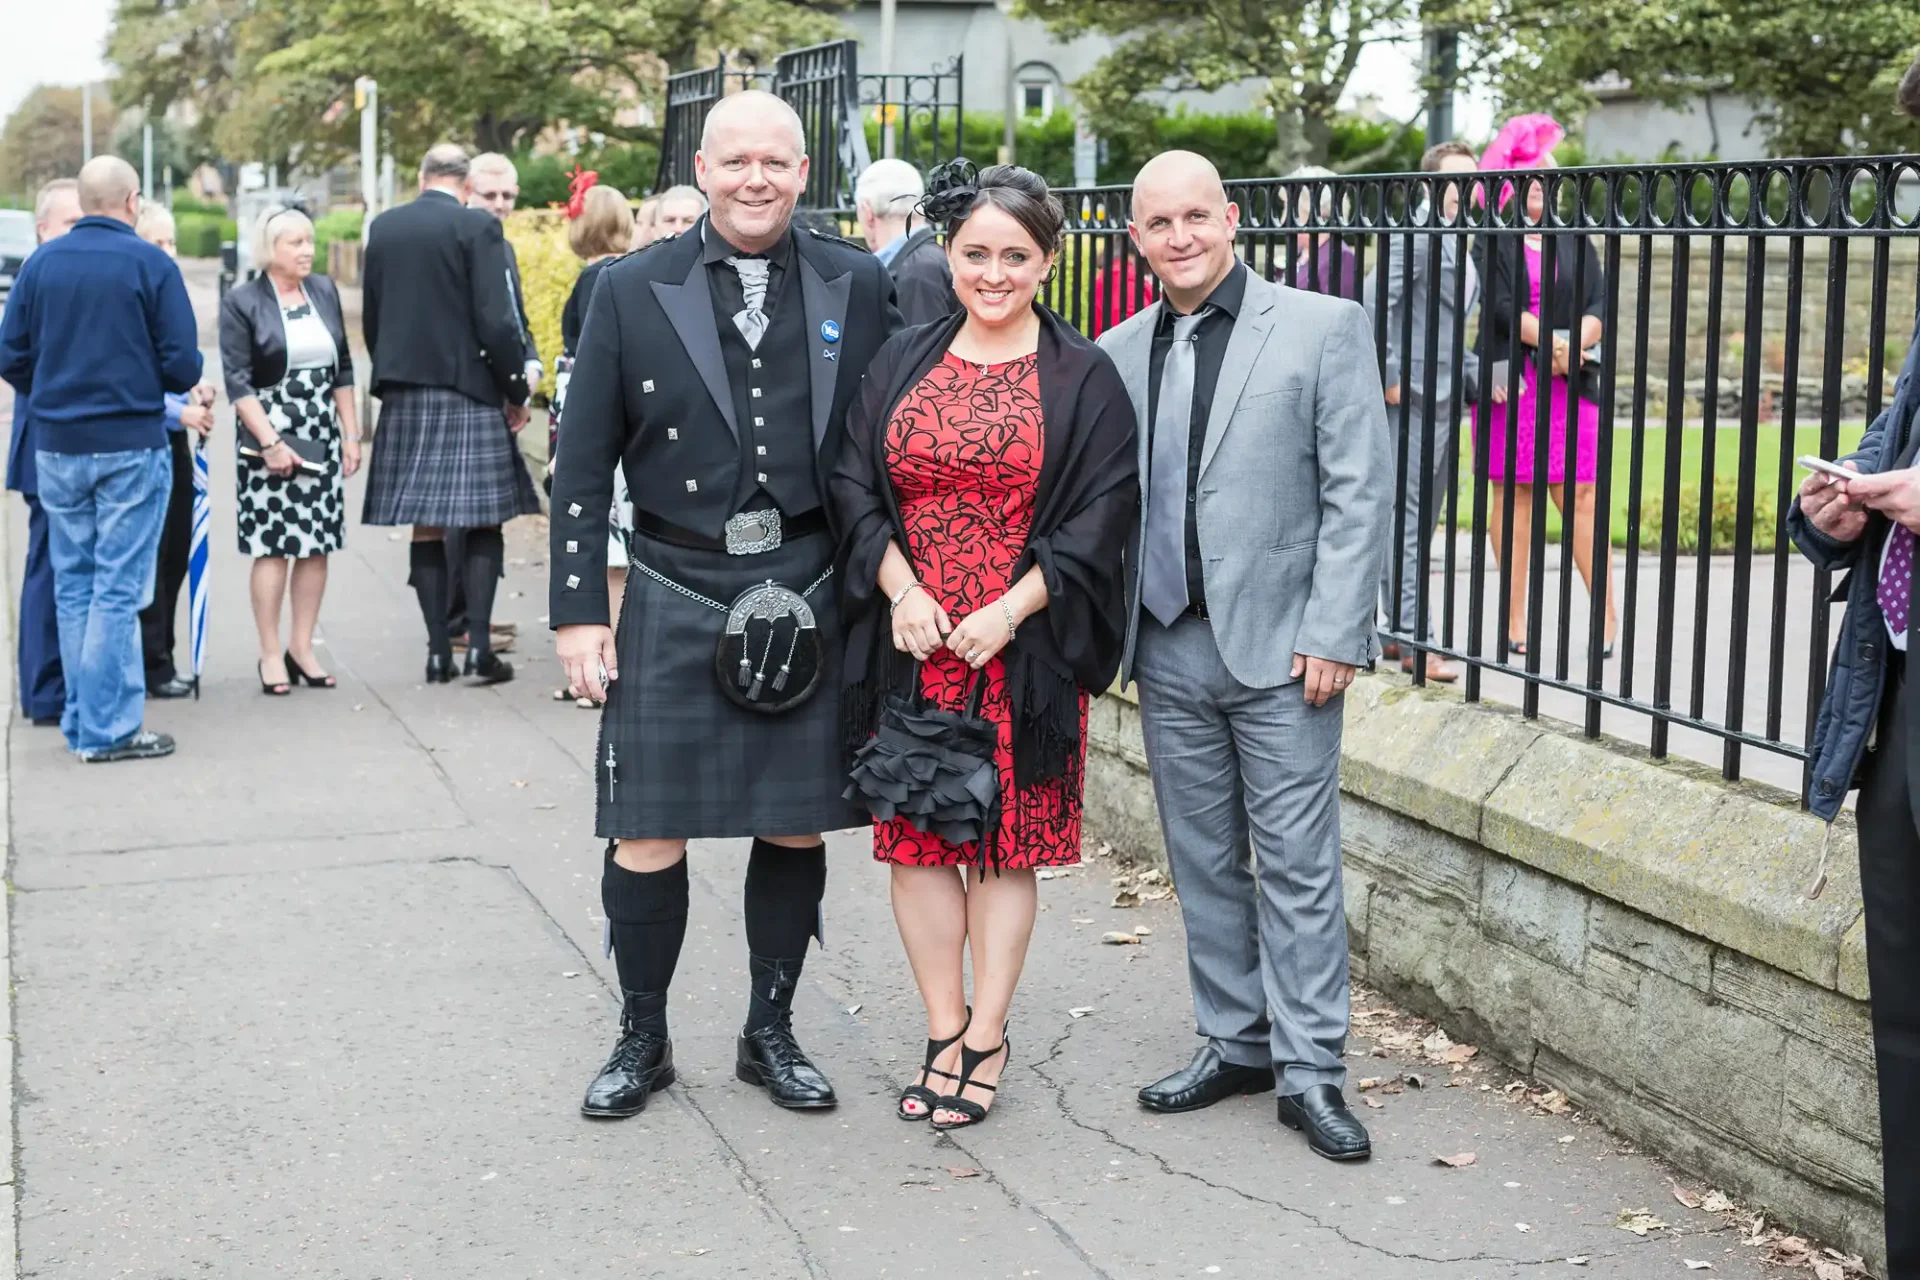 Two men and a woman posing for a photo at a social gathering, one man in a kilt and the other two in formal wear, with other guests in the background.